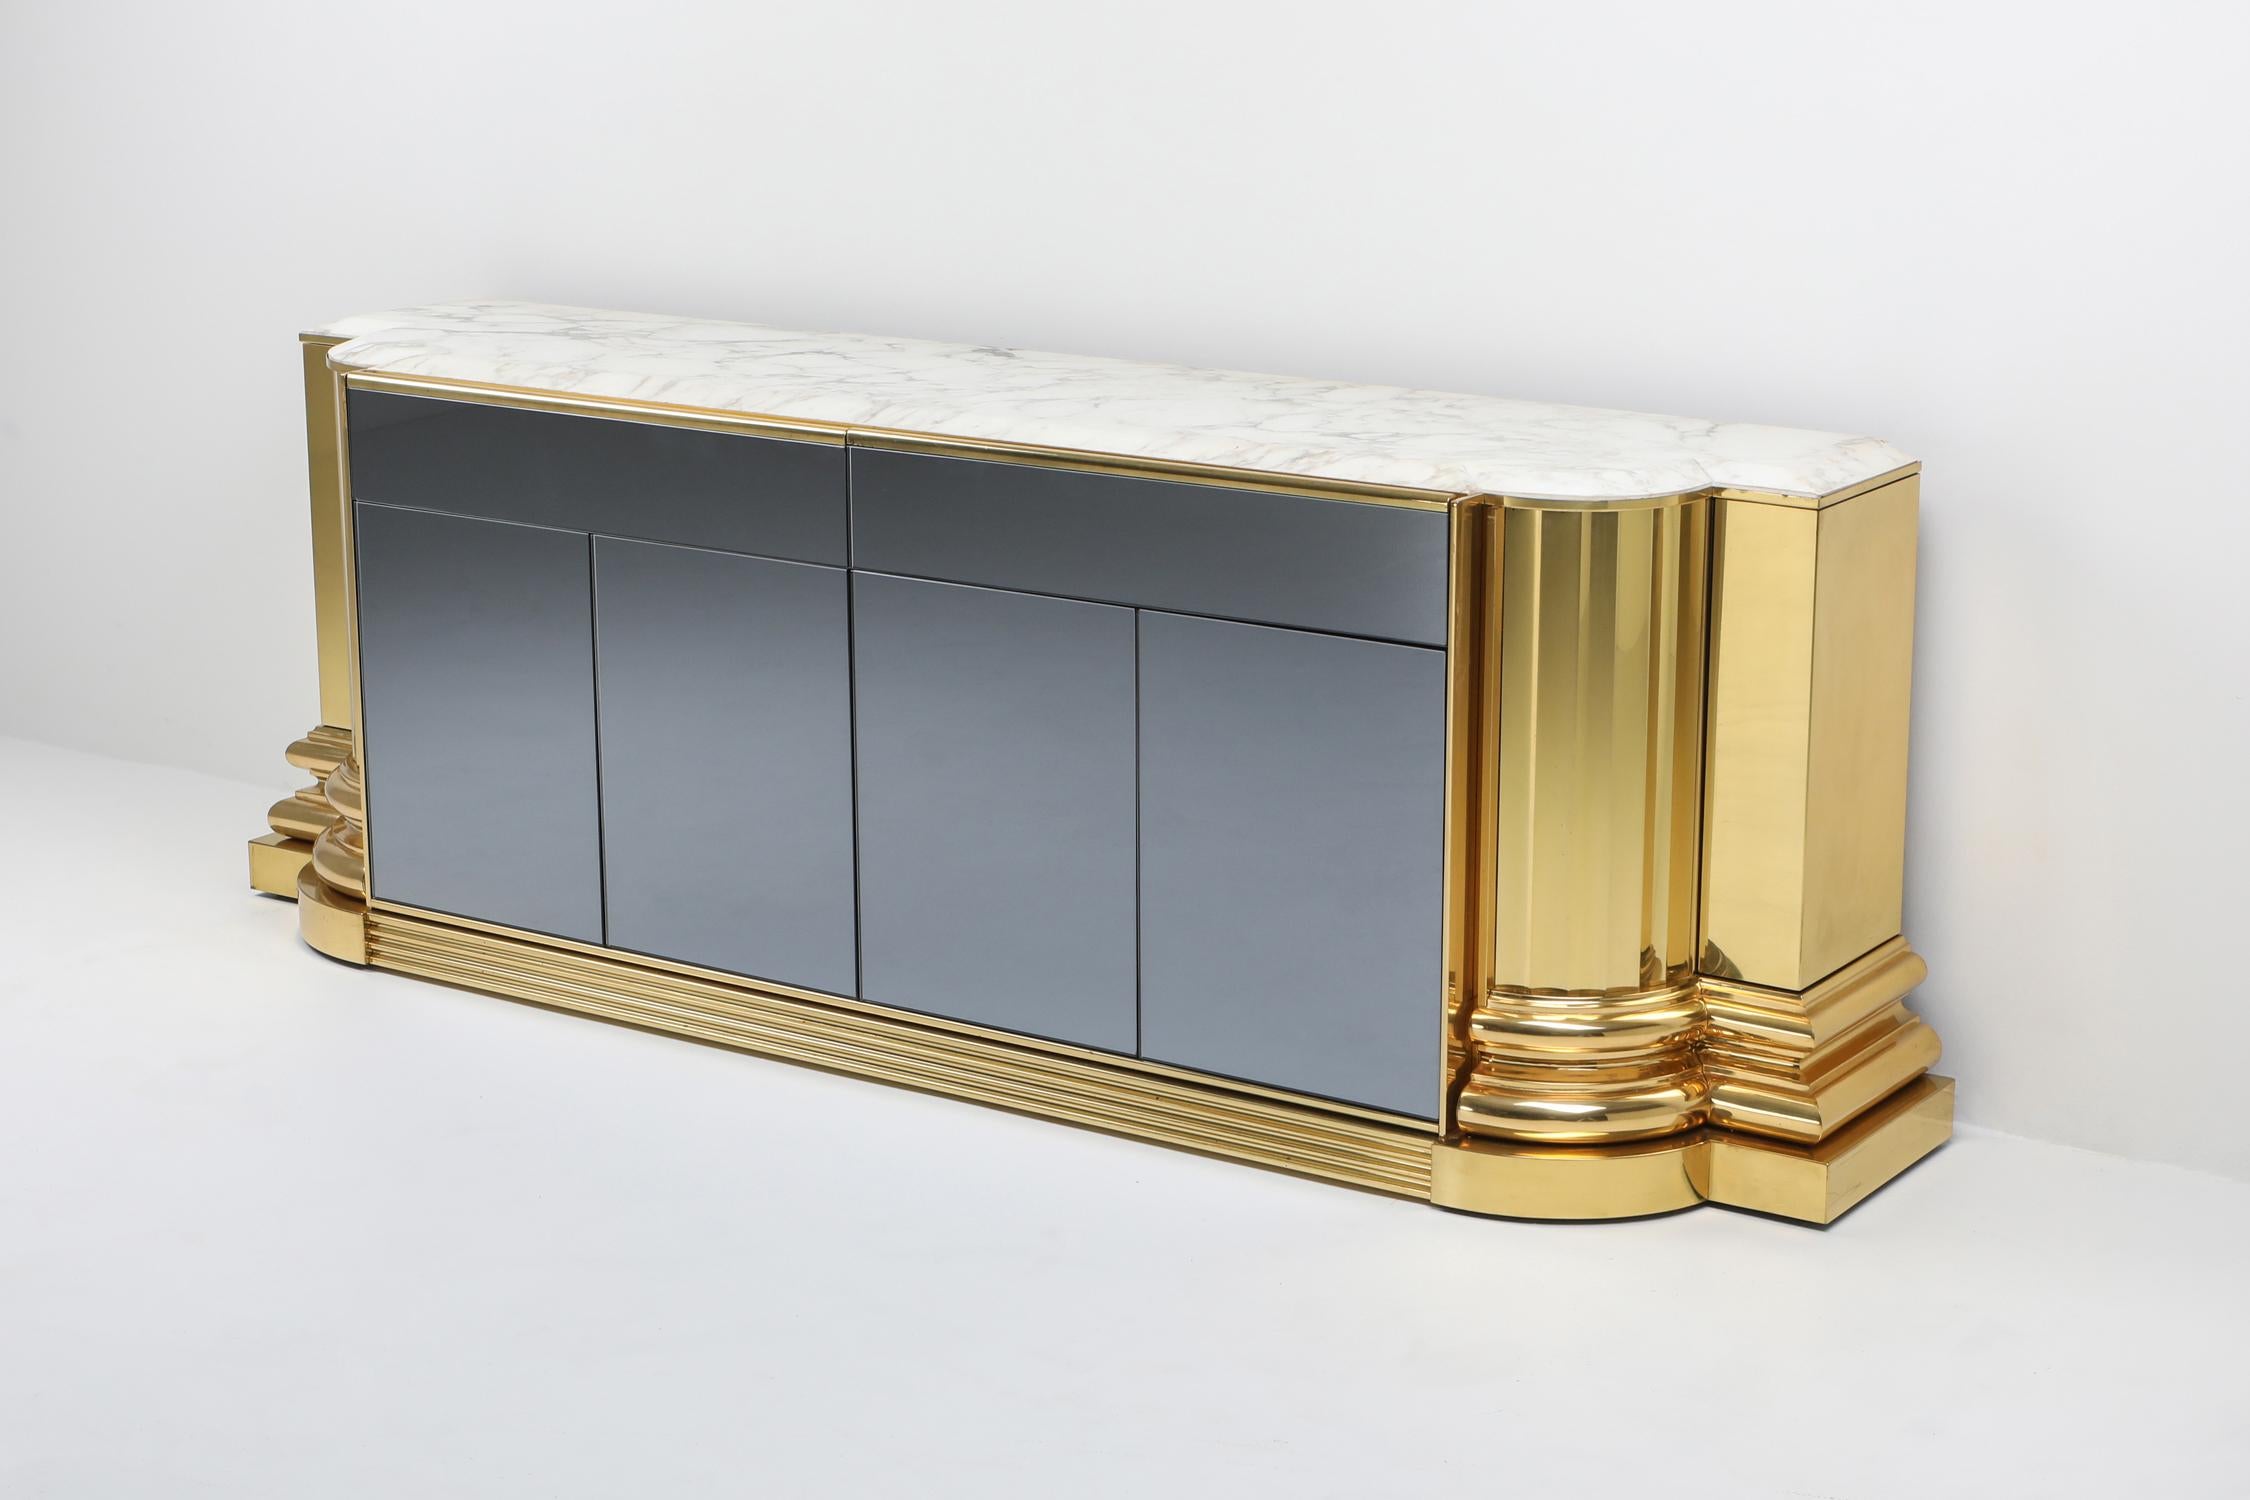 European Brass and Marble Credenza by Sandro Petti for l'angelometallarte